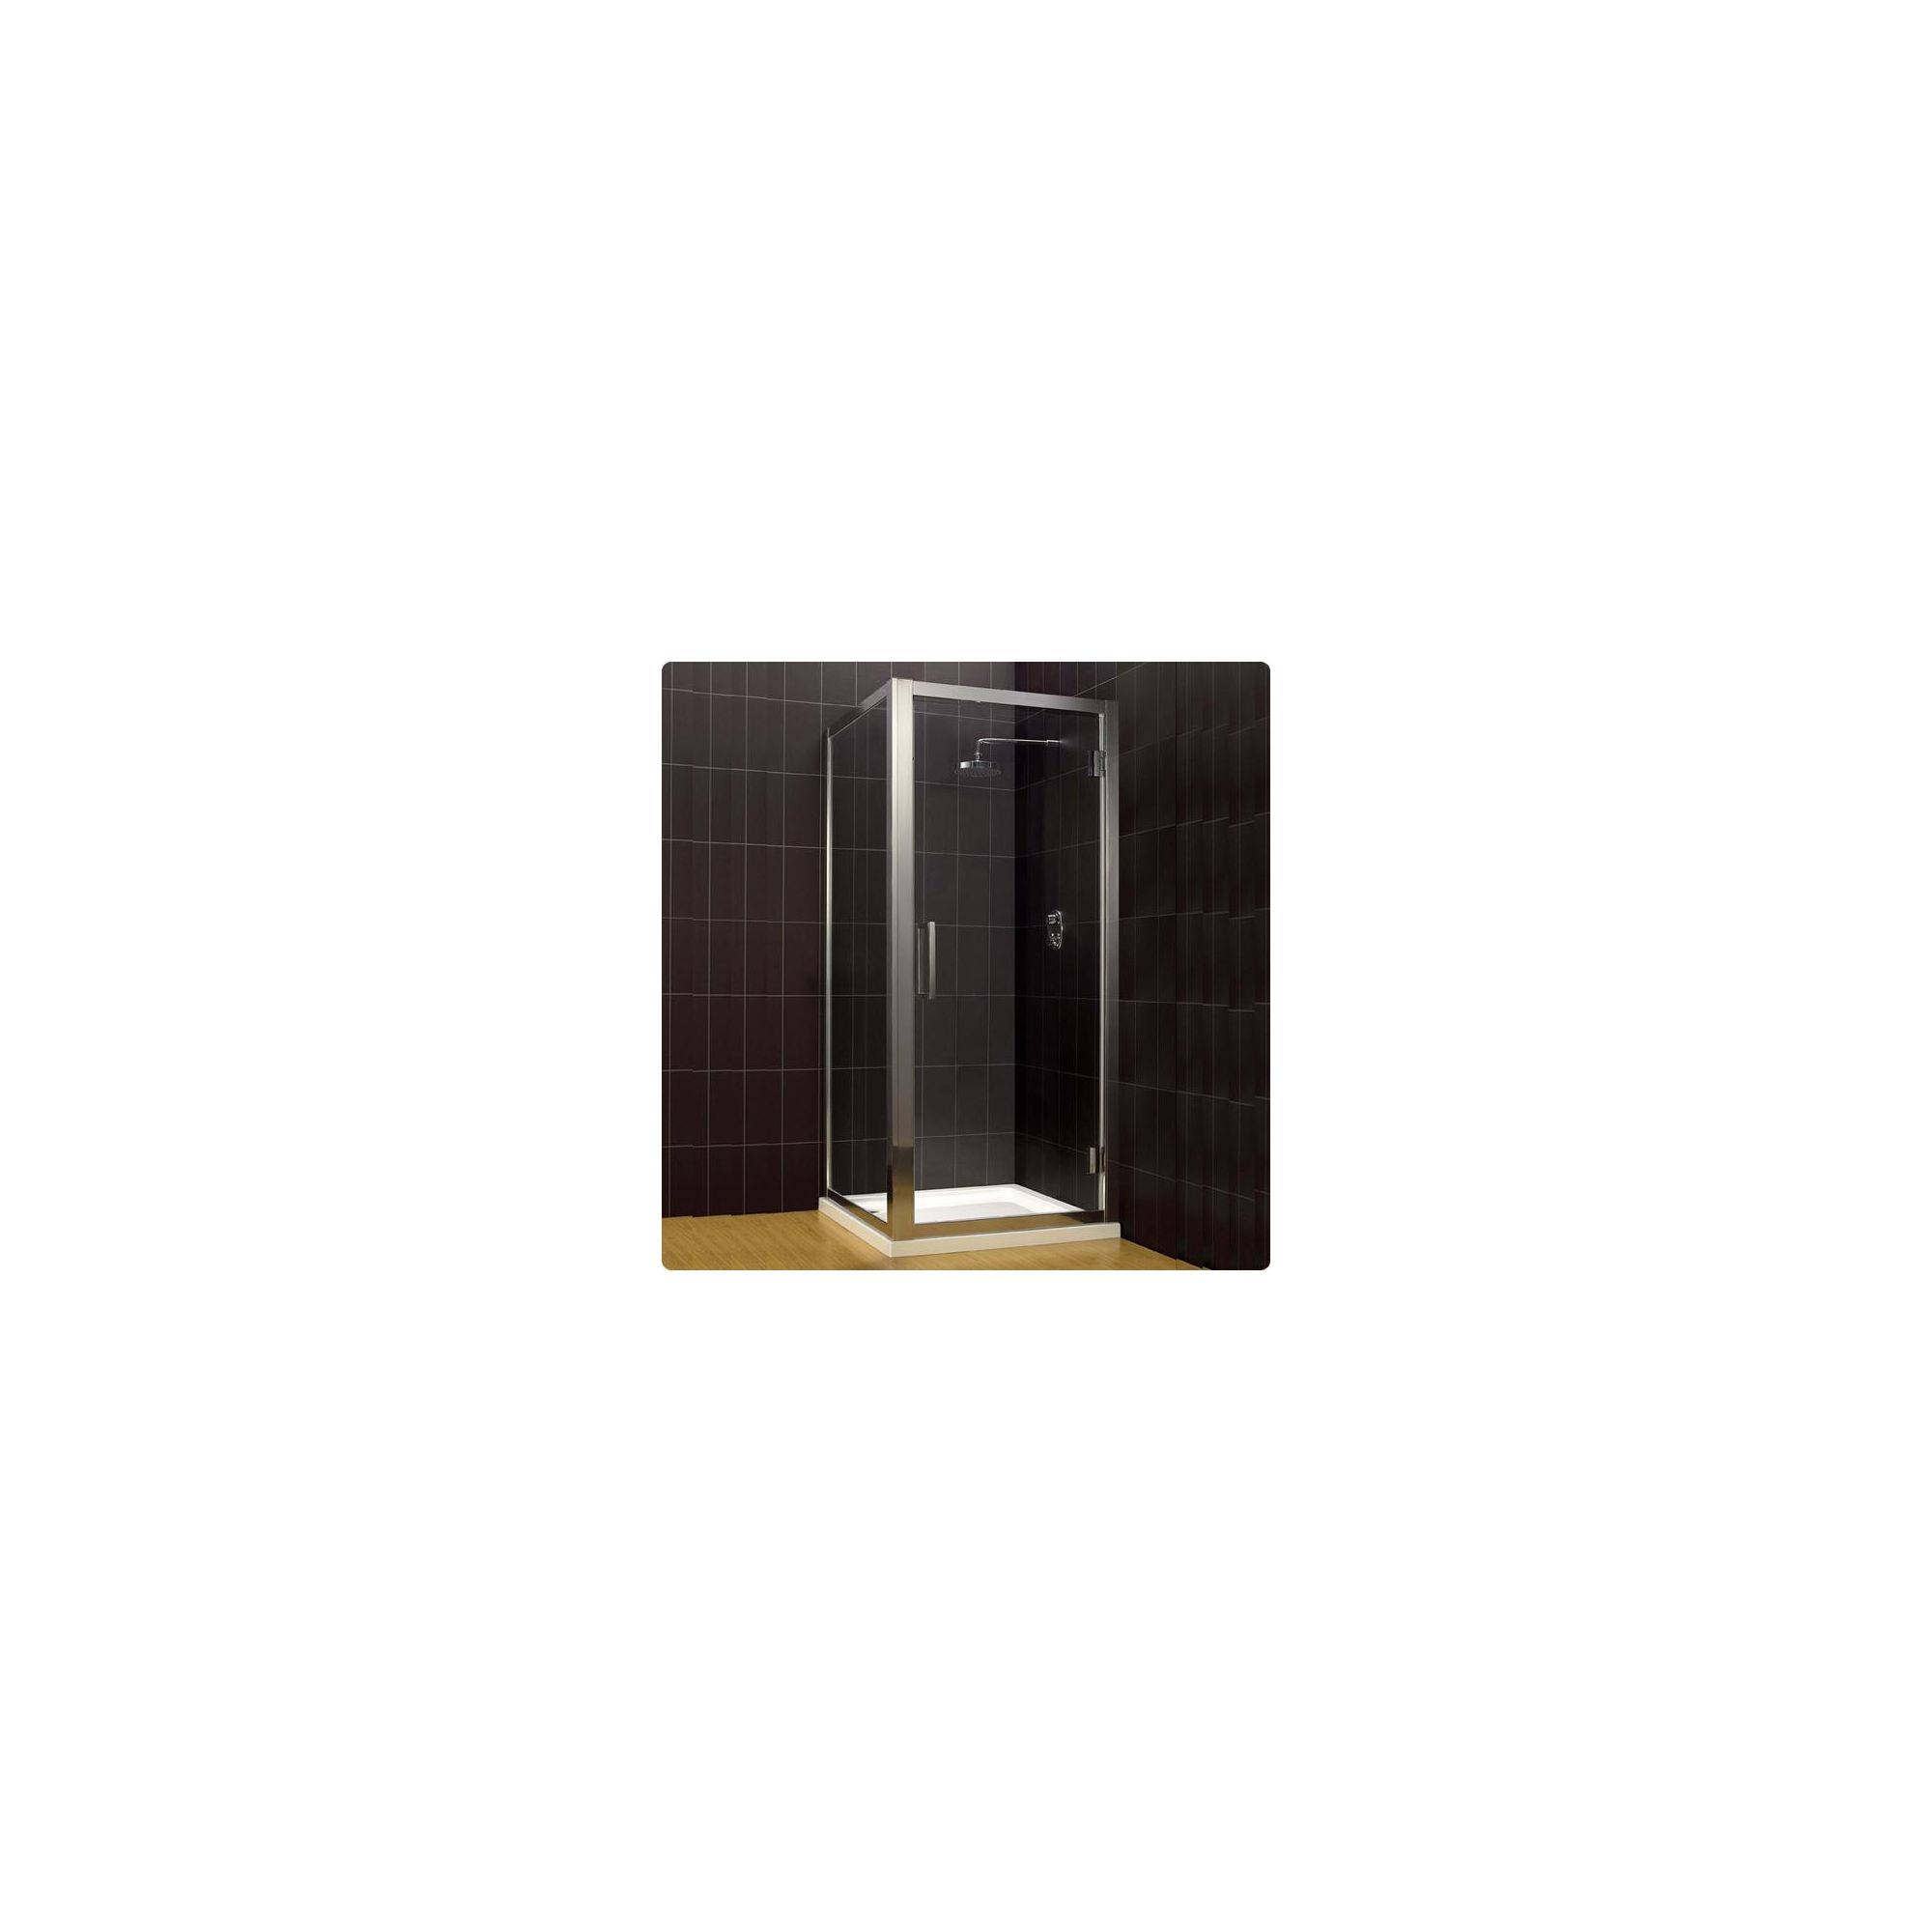 Duchy Supreme Silver Hinged Door Shower Enclosure with Towel Rail, 1000mm x 1000mm, Standard Tray, 8mm Glass at Tesco Direct